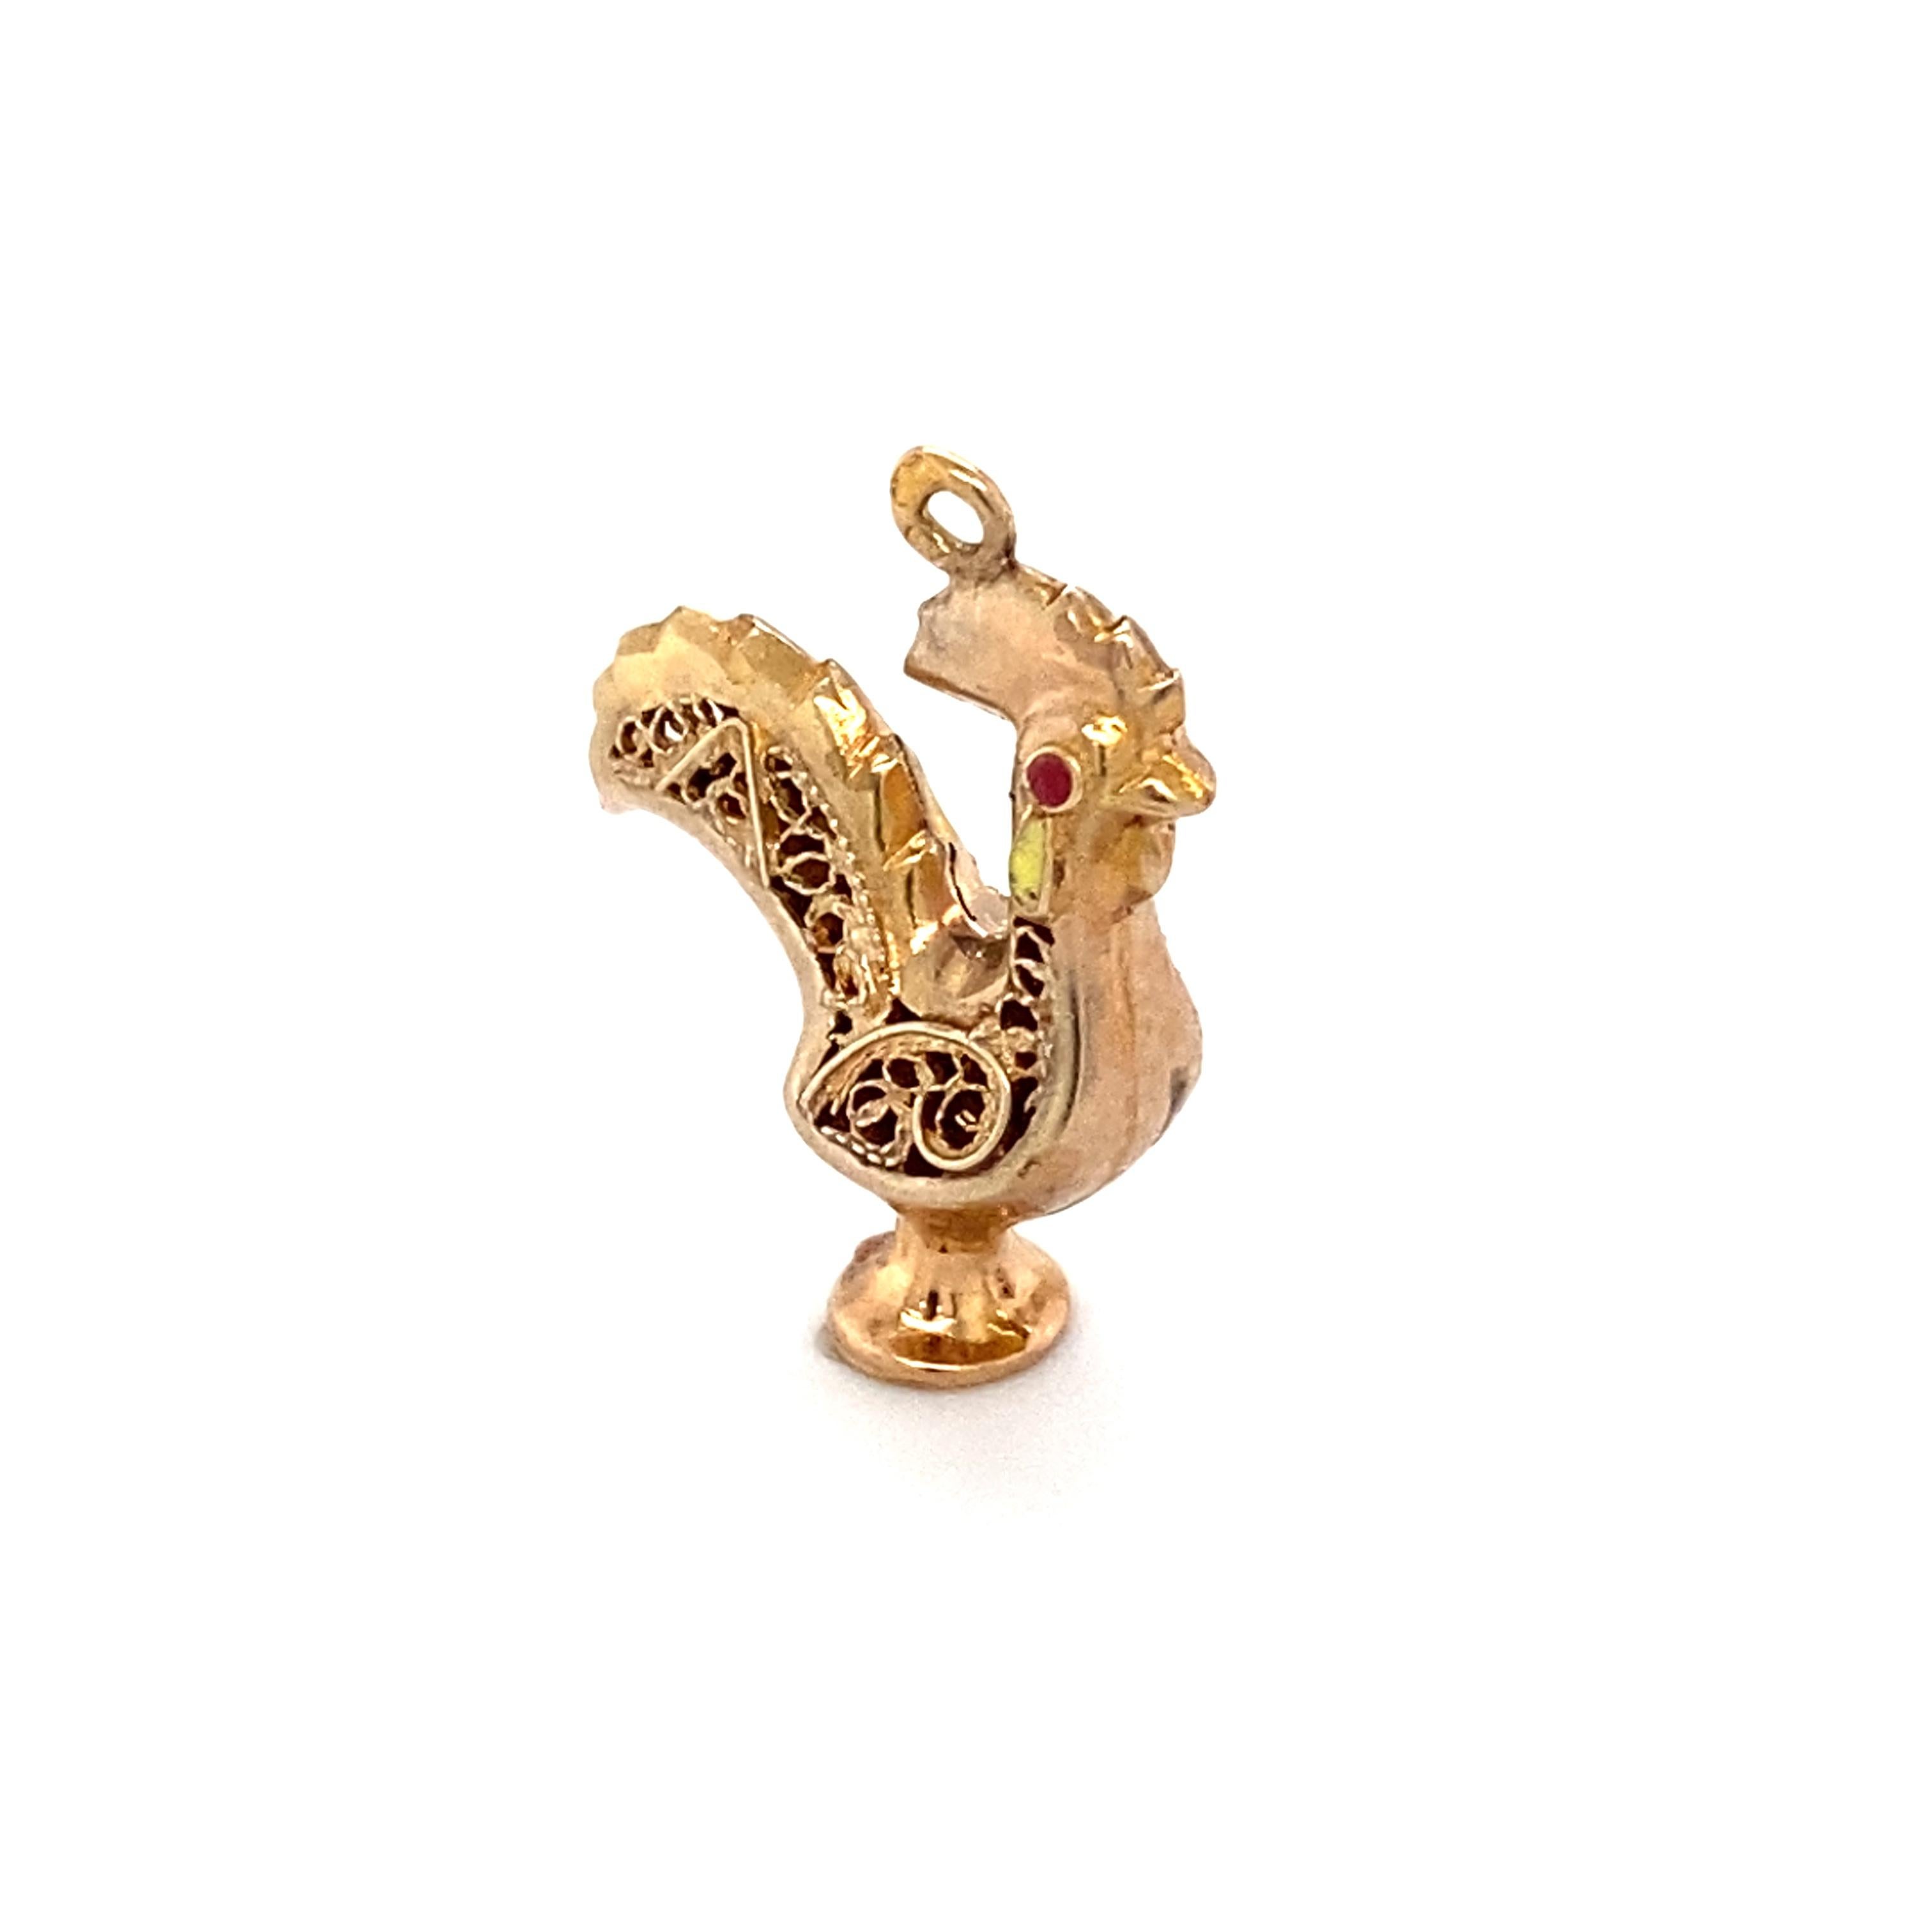 Item Details: 
Metal: 19 Karat Yellow Gold
Weight: 1.7 grams 

Item Features: 
This stunning rooster charm has intricate filigree design and a small ruby eye all set in 19 karat yellow gold. 